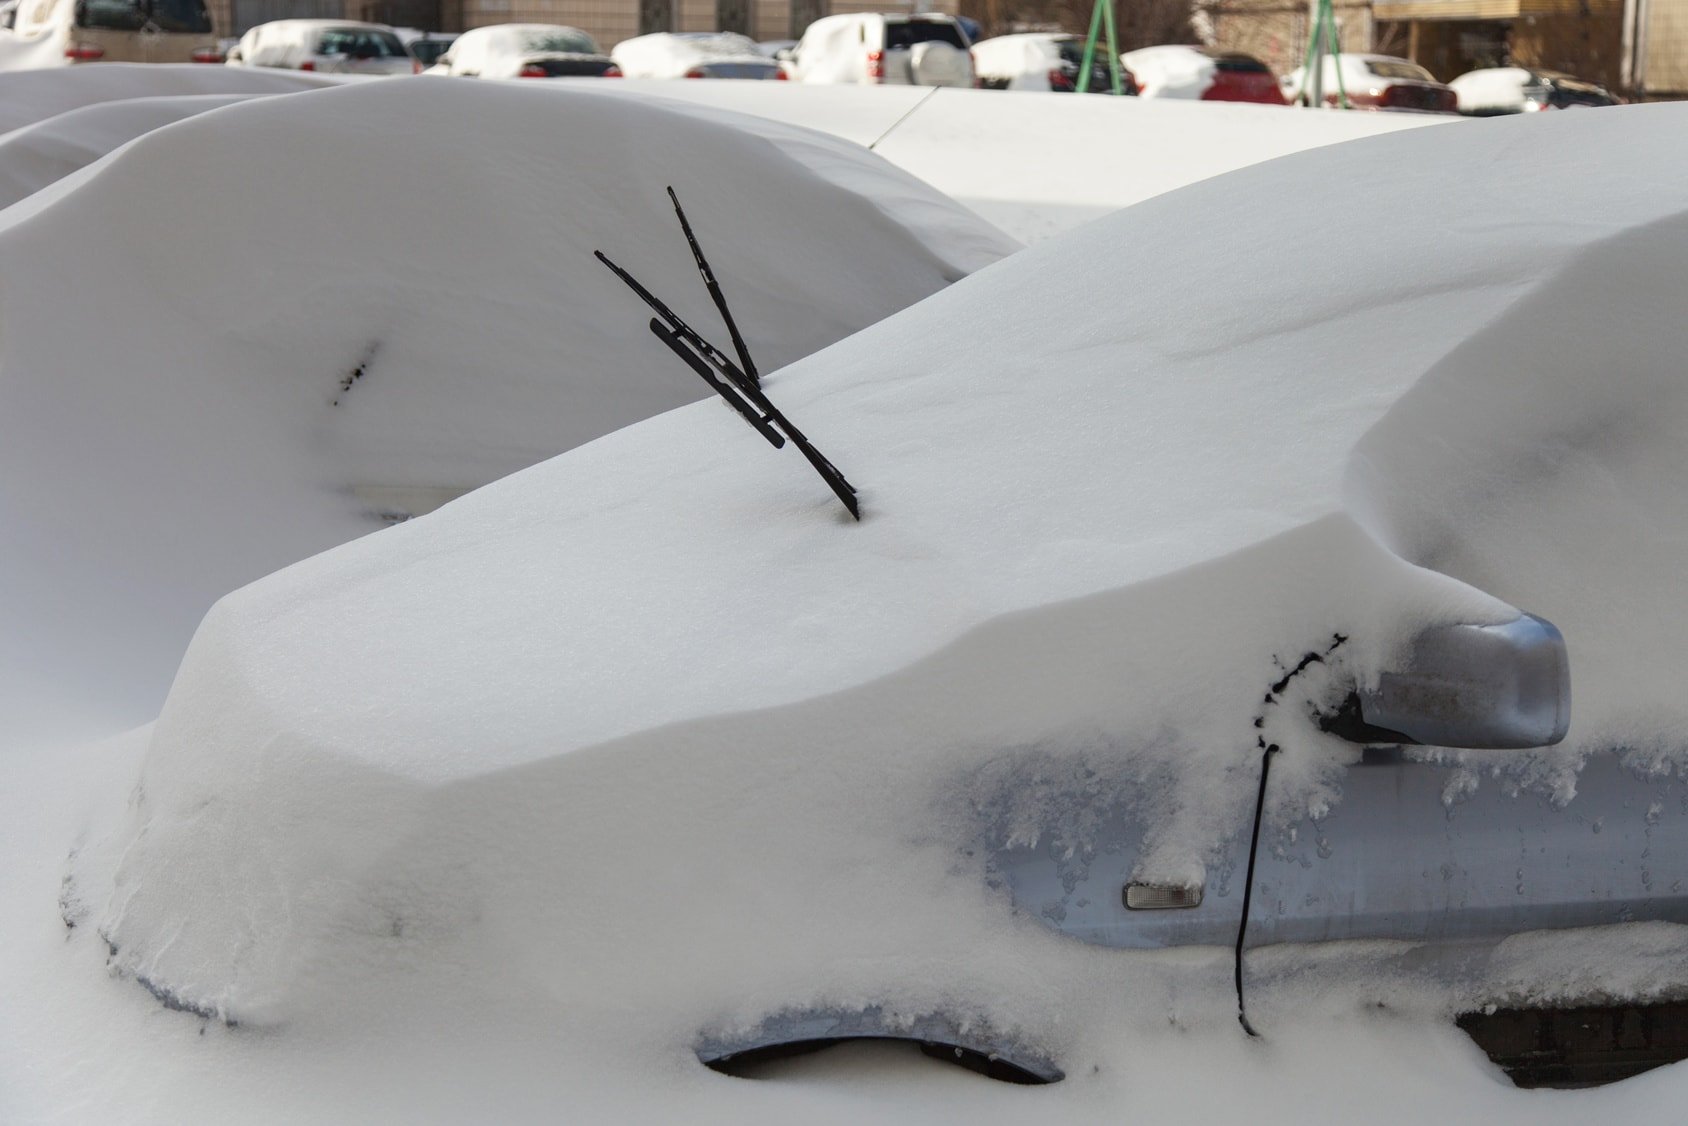 Should You Leave Your Wipers Up or Down When It Snows?